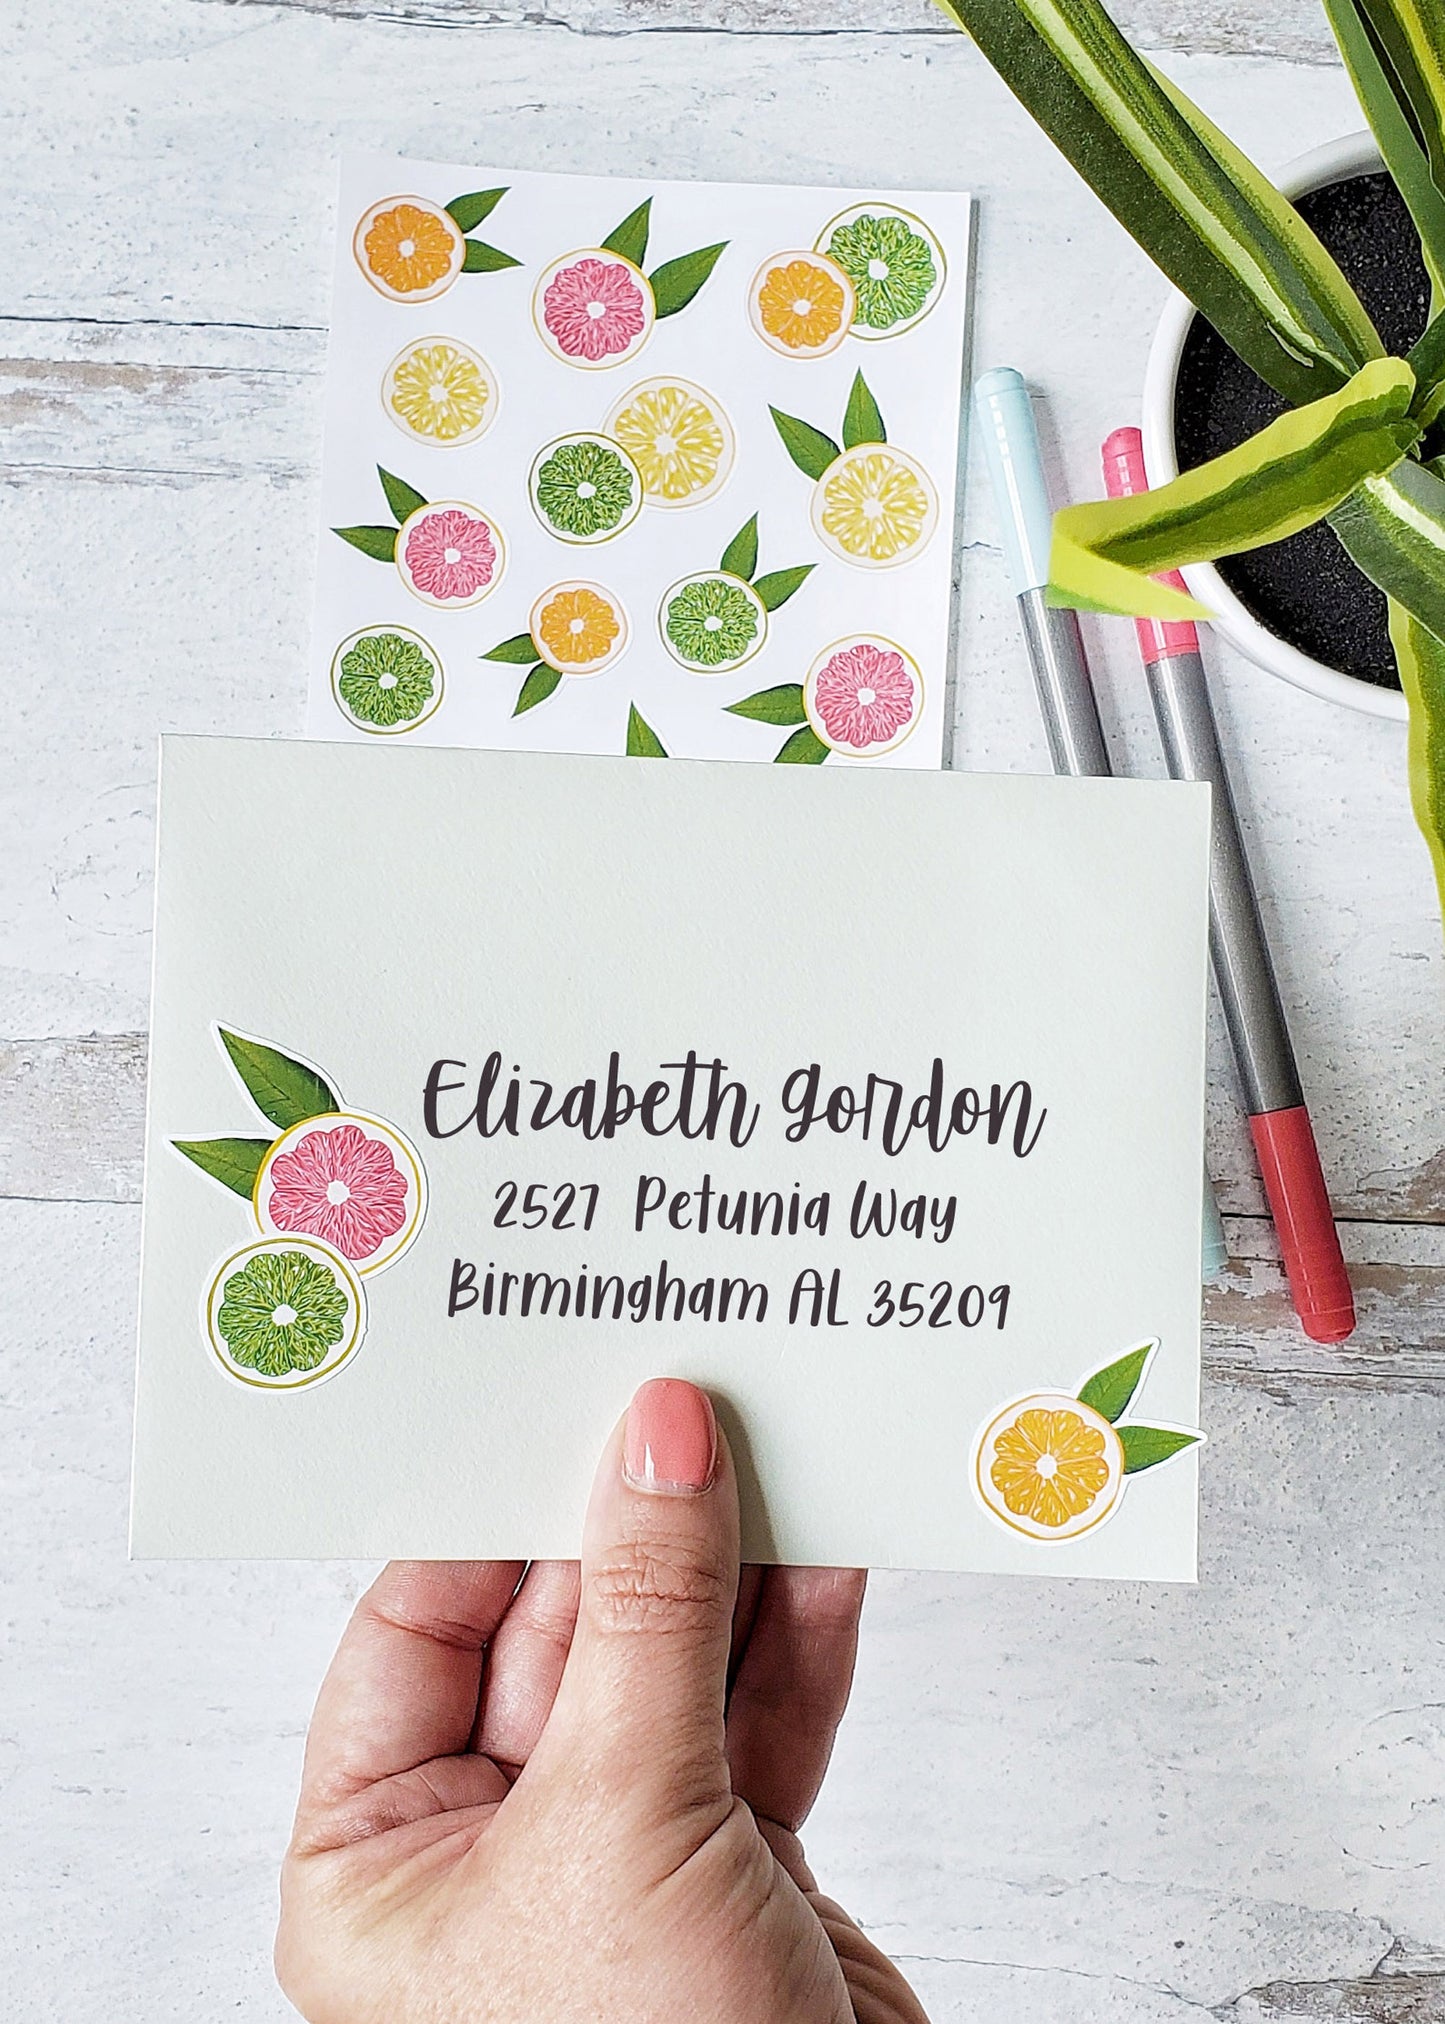 A mailing envelope decorated with an orange, lemon and pink grapefruit sticker.